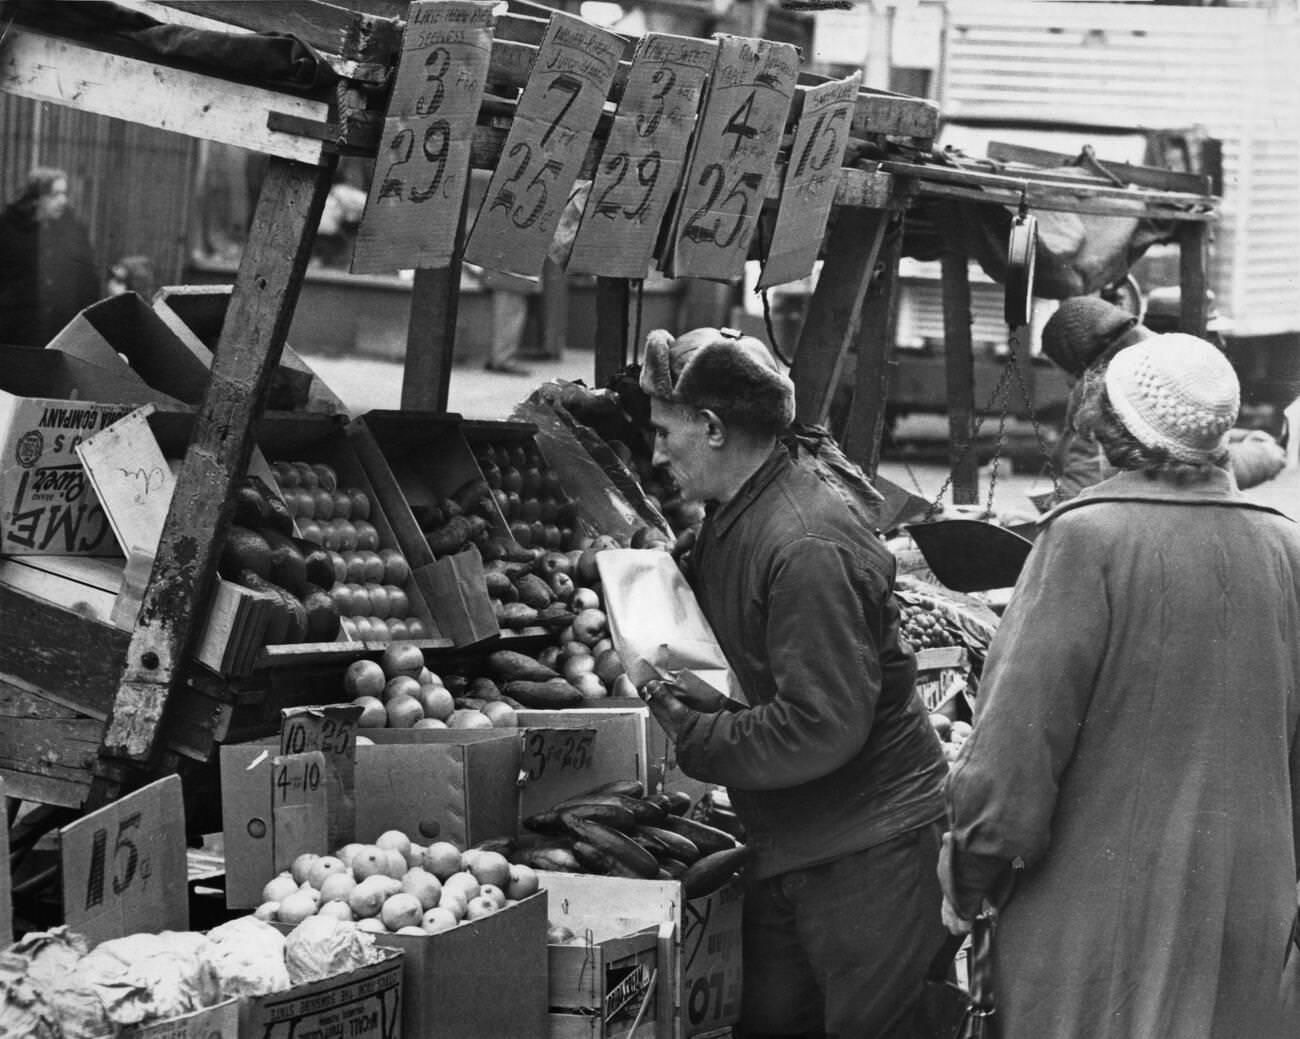 Vendor Sells Produce From His Pushcart At The Belmont Avenue Market, Brooklyn, 1962.